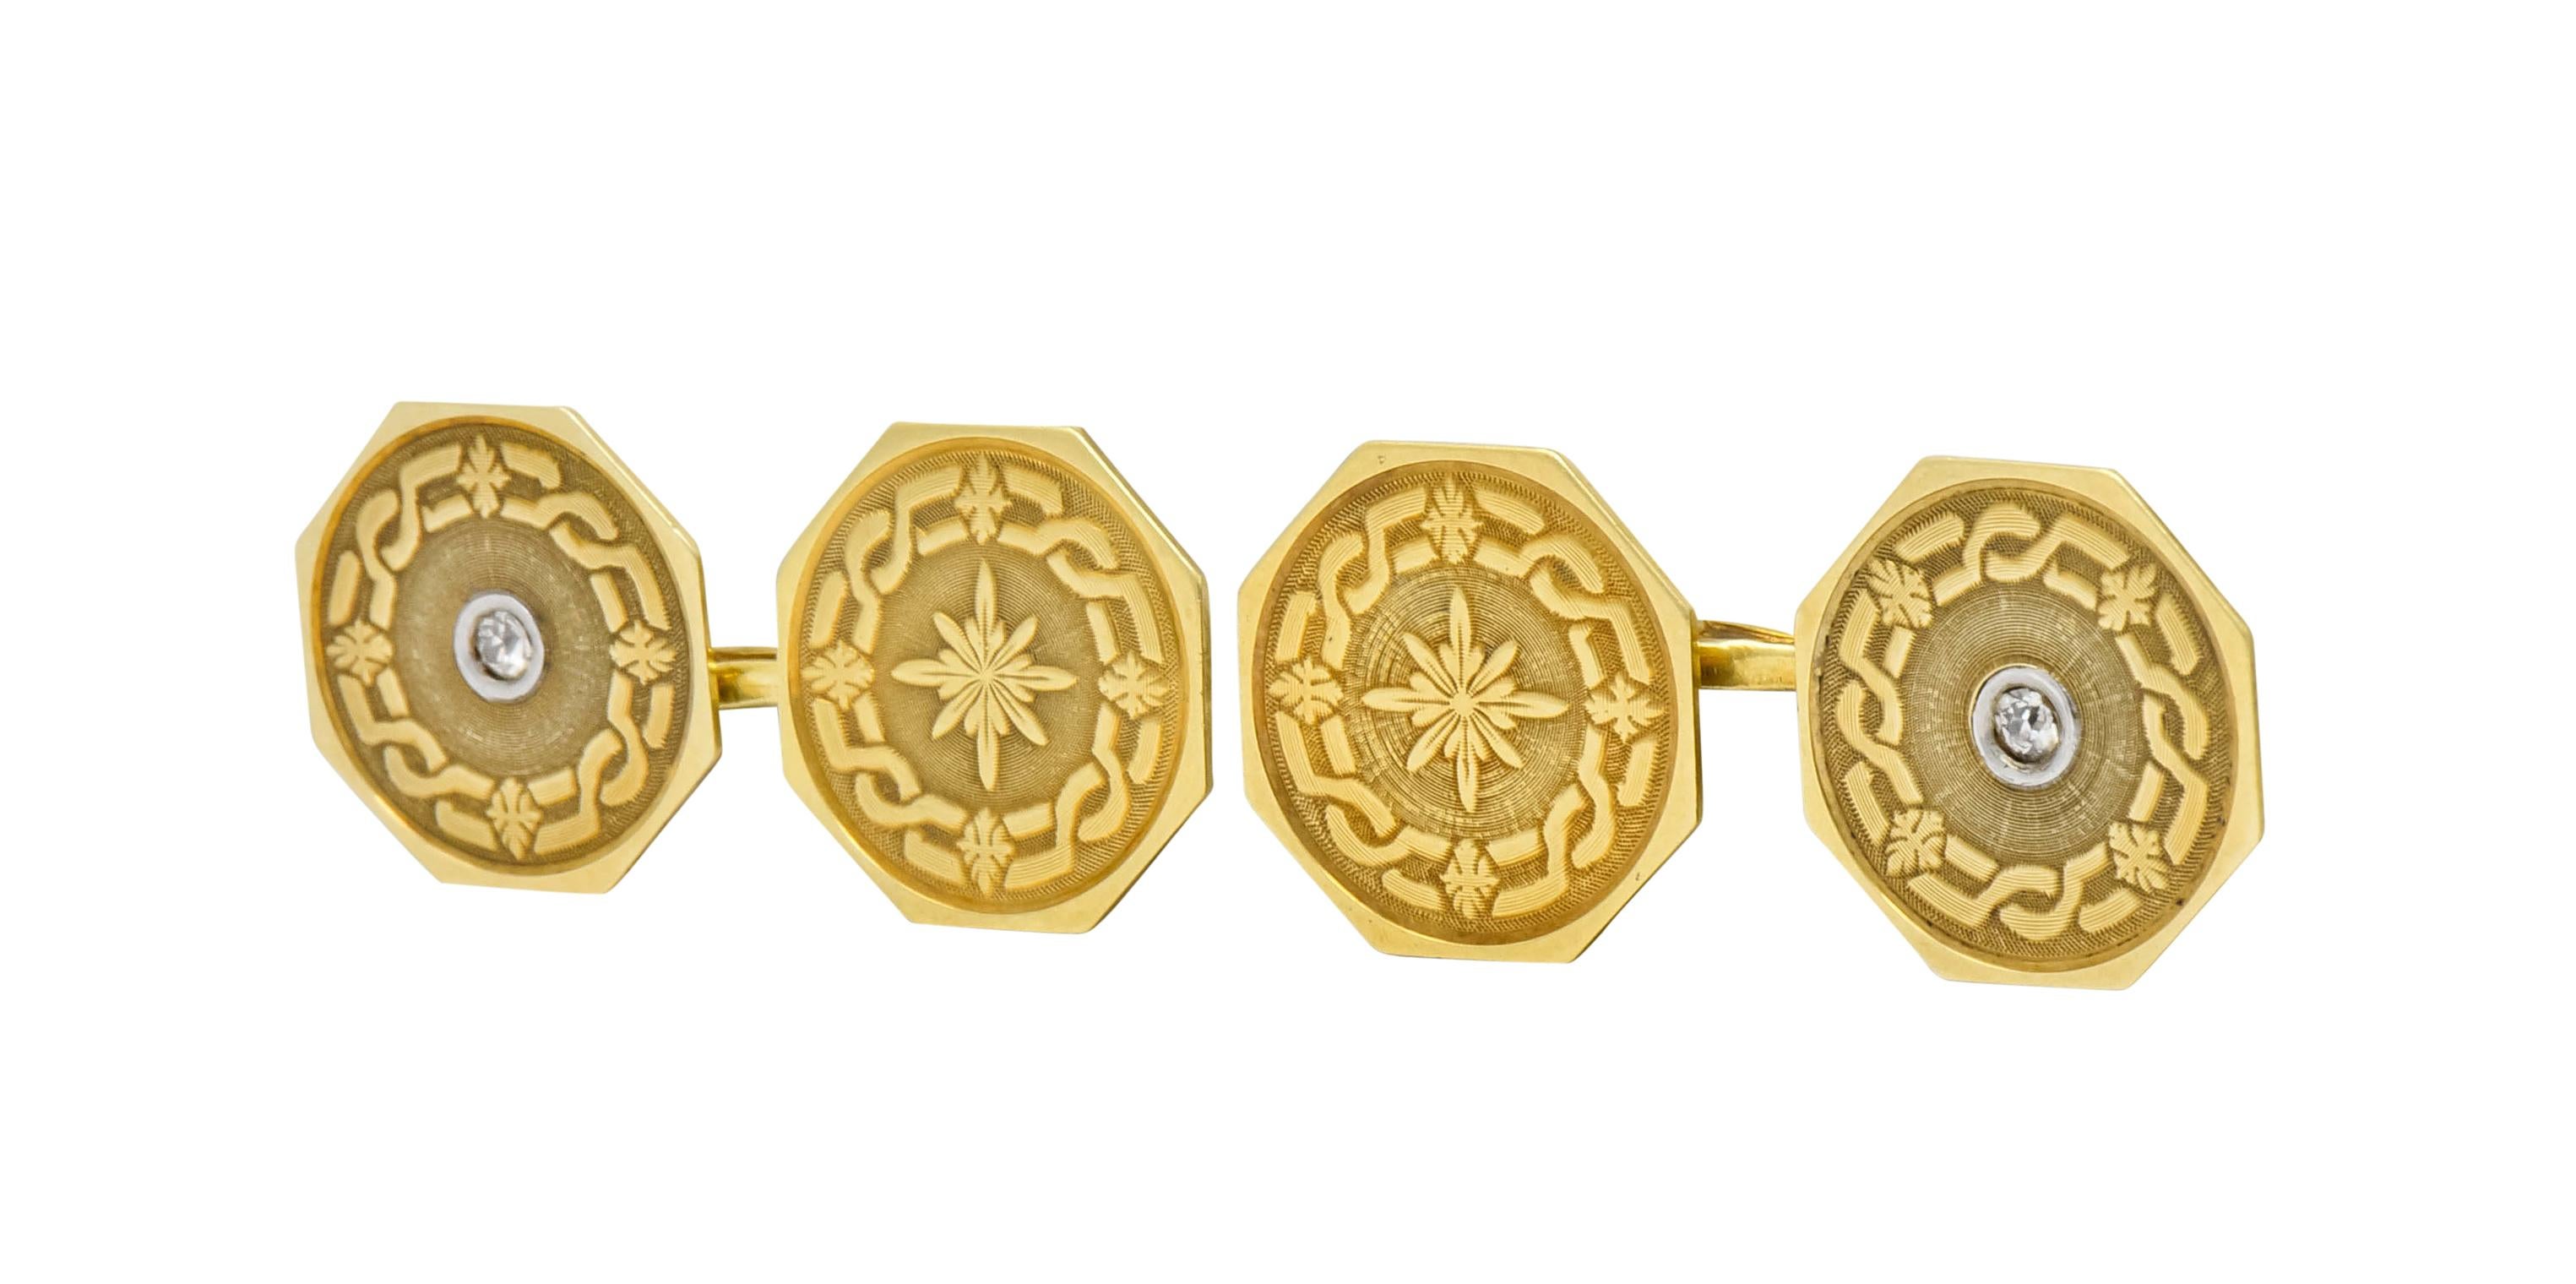 Link style cufflinks terminating as two octagonal disks with a matte gold ridged texture finish

Surrounded by a meandering Celtic knot pattern with four foliate motif stations at each cardinal point

Centering a starburst motif with bezel set old